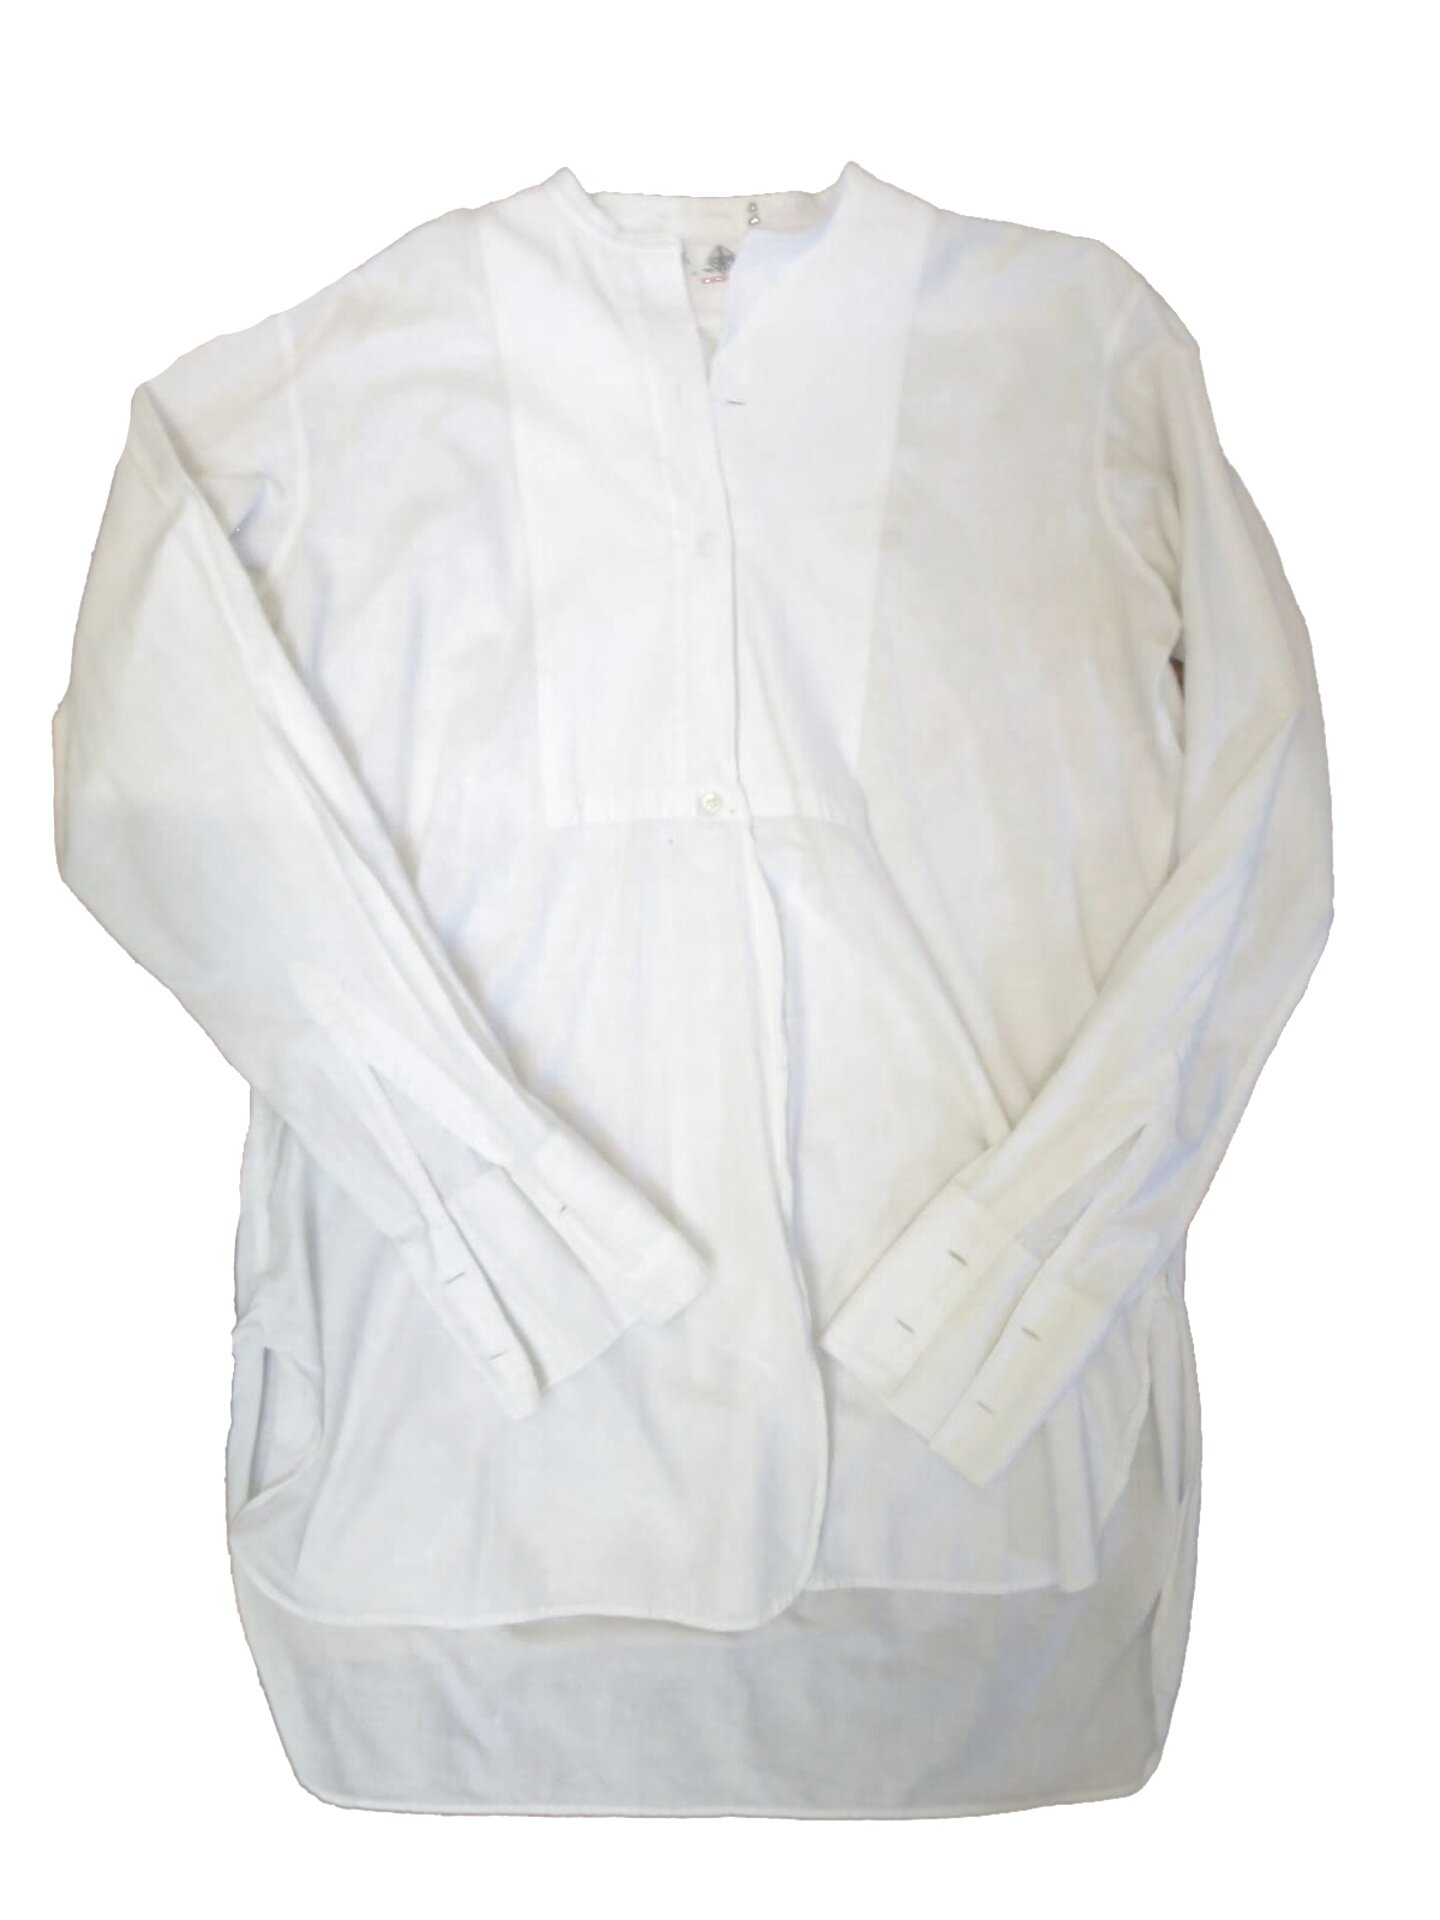 Vintage Collarless Shirt White for sale in UK | 56 used Vintage ...